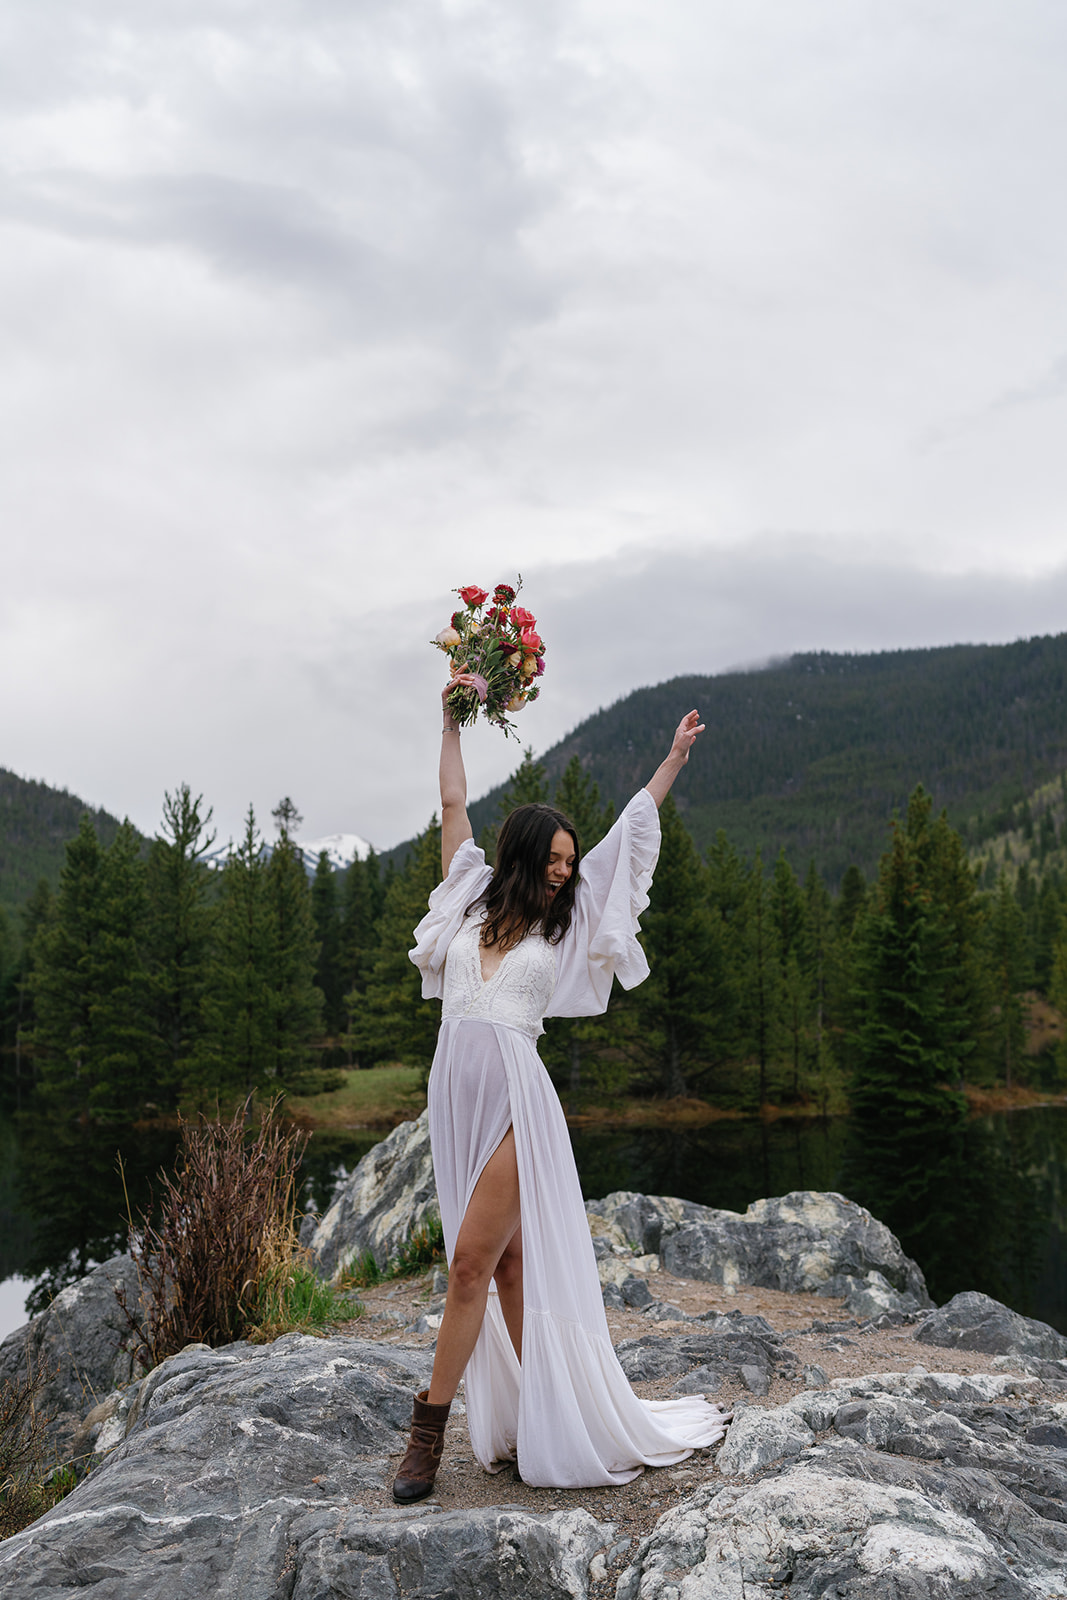 A new bride dances and celebrates while standing on a rock by a lake